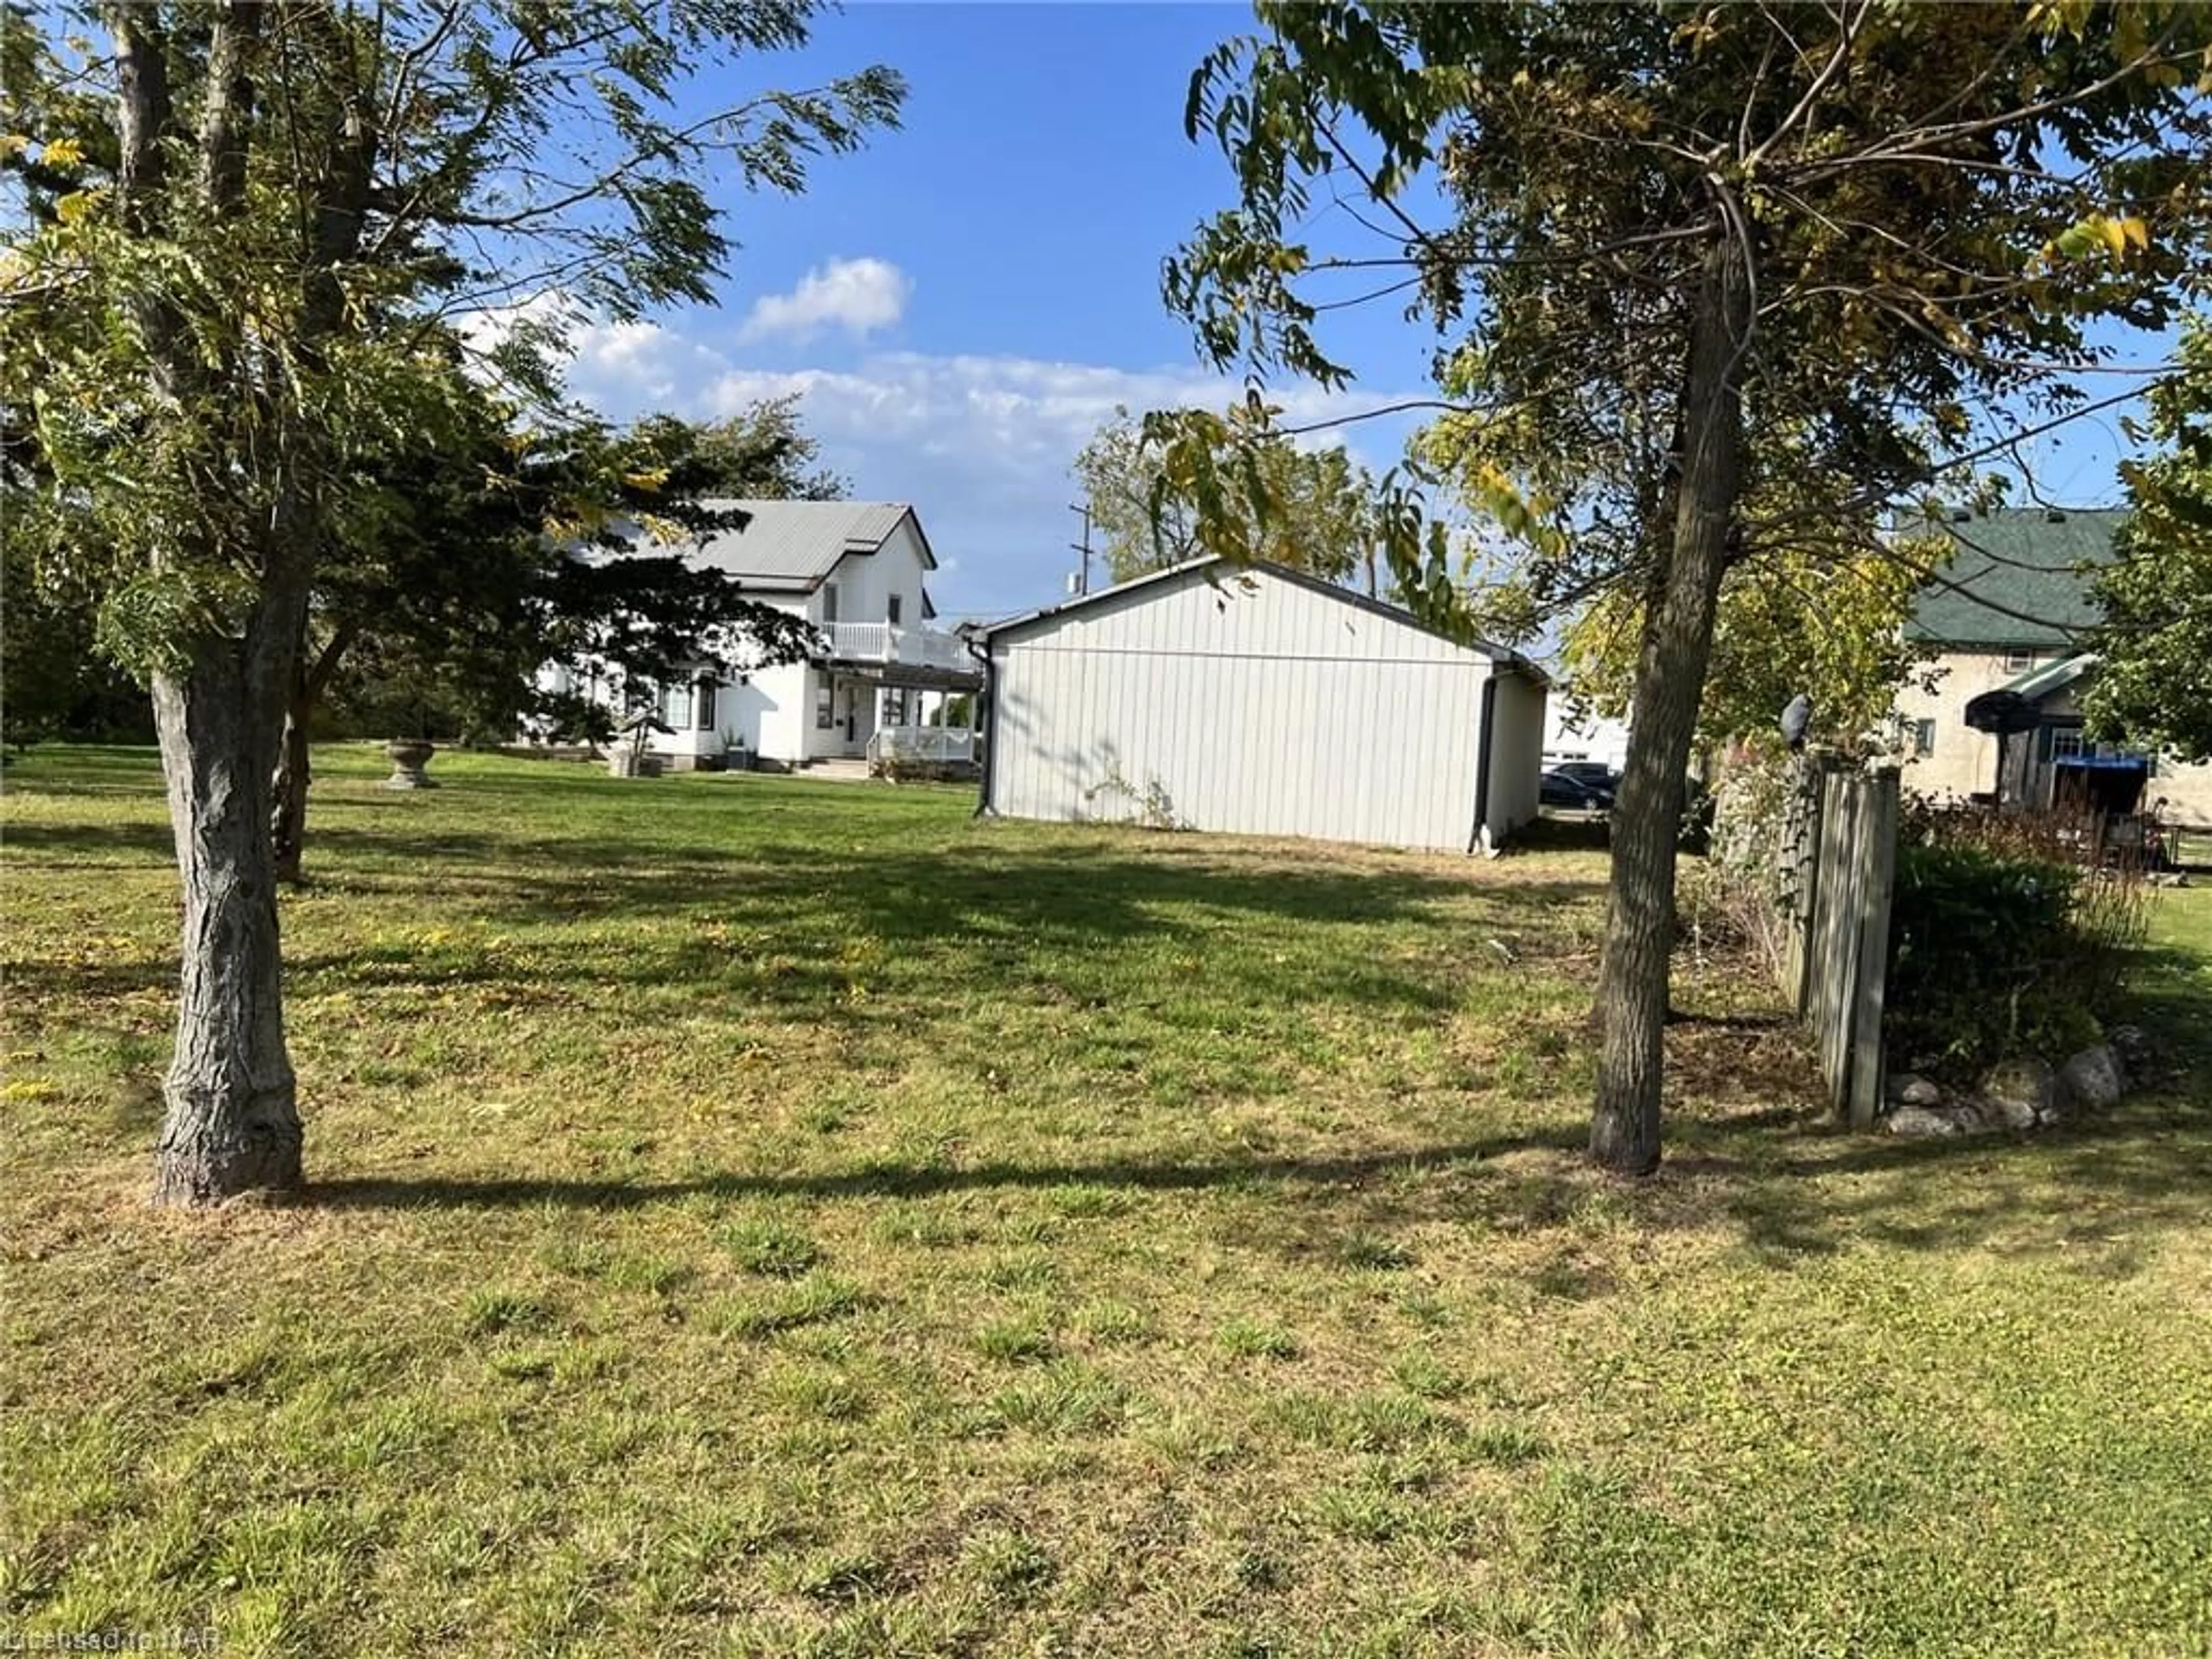 Fenced yard for 4188 Linden Ave, Campden Ontario L0R 2G0